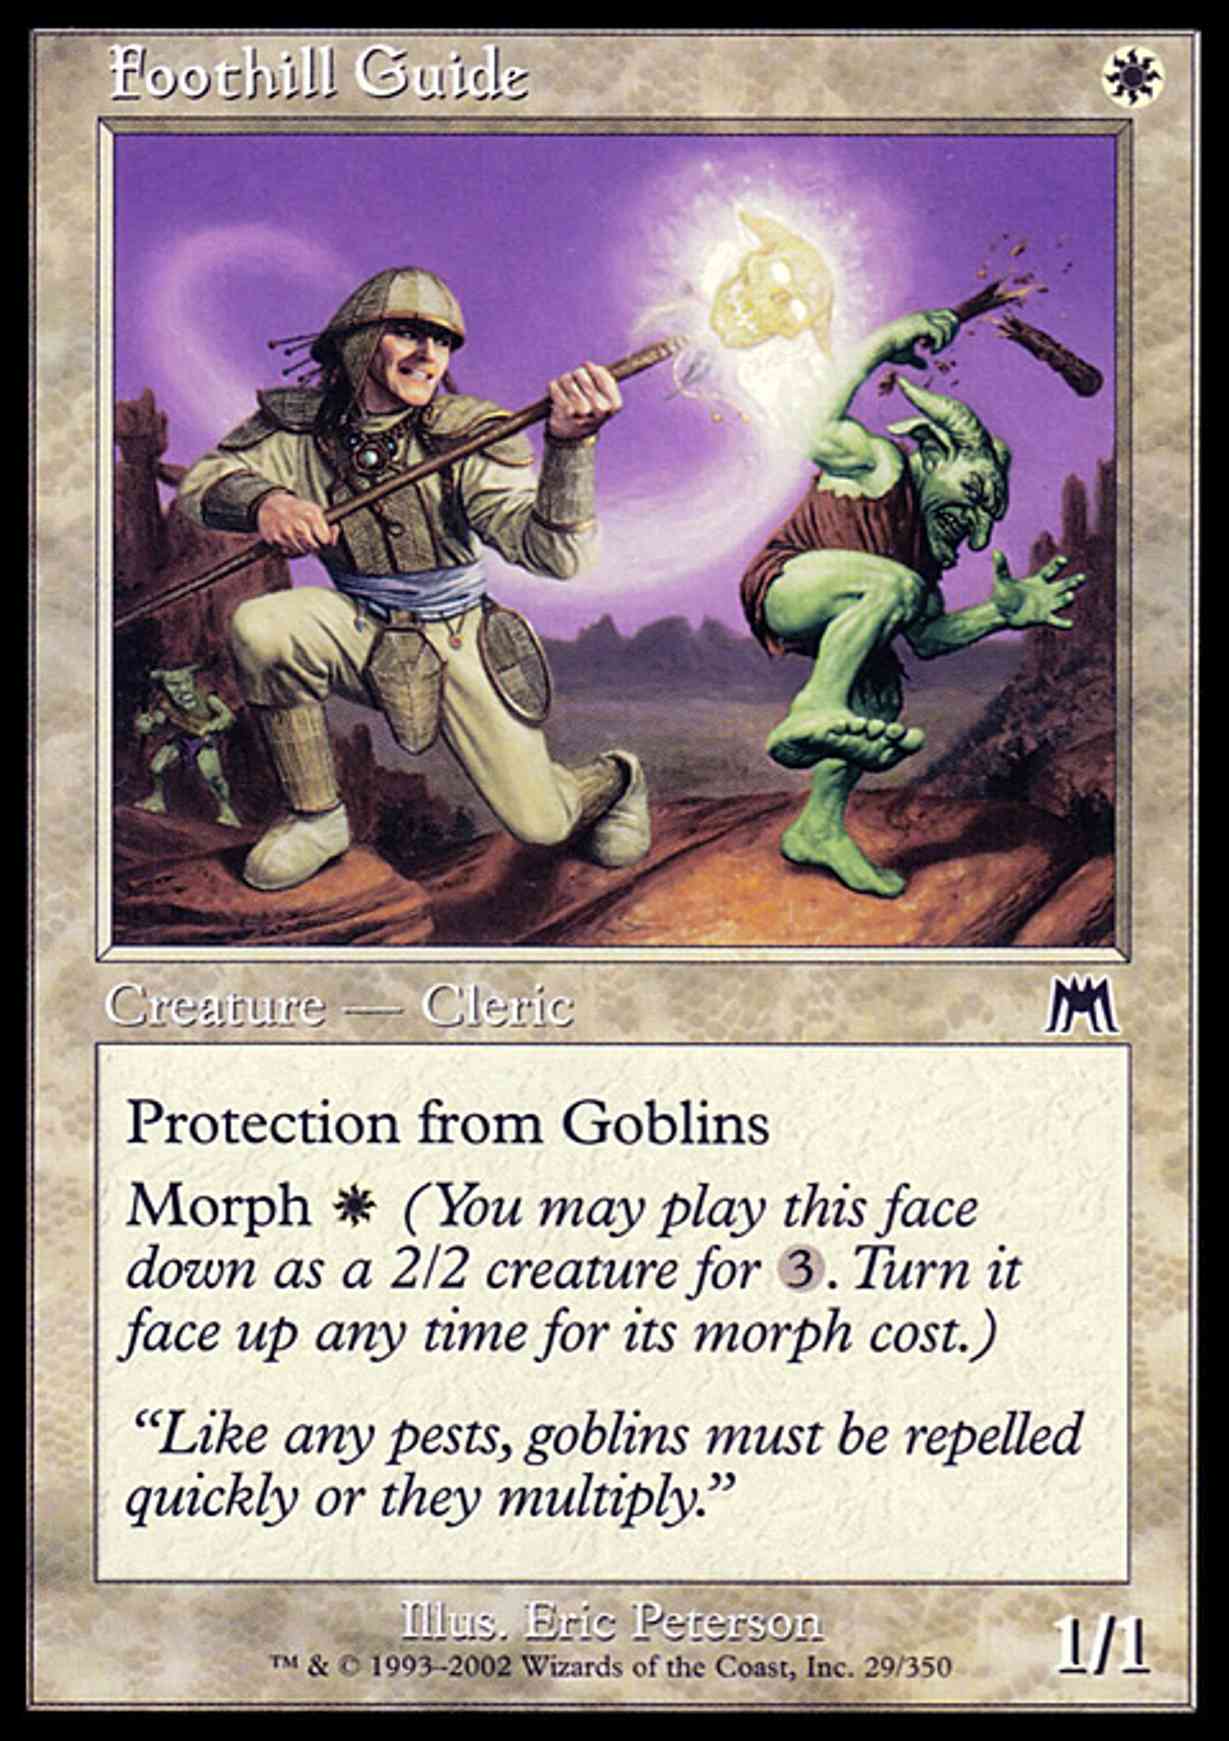 Foothill Guide magic card front